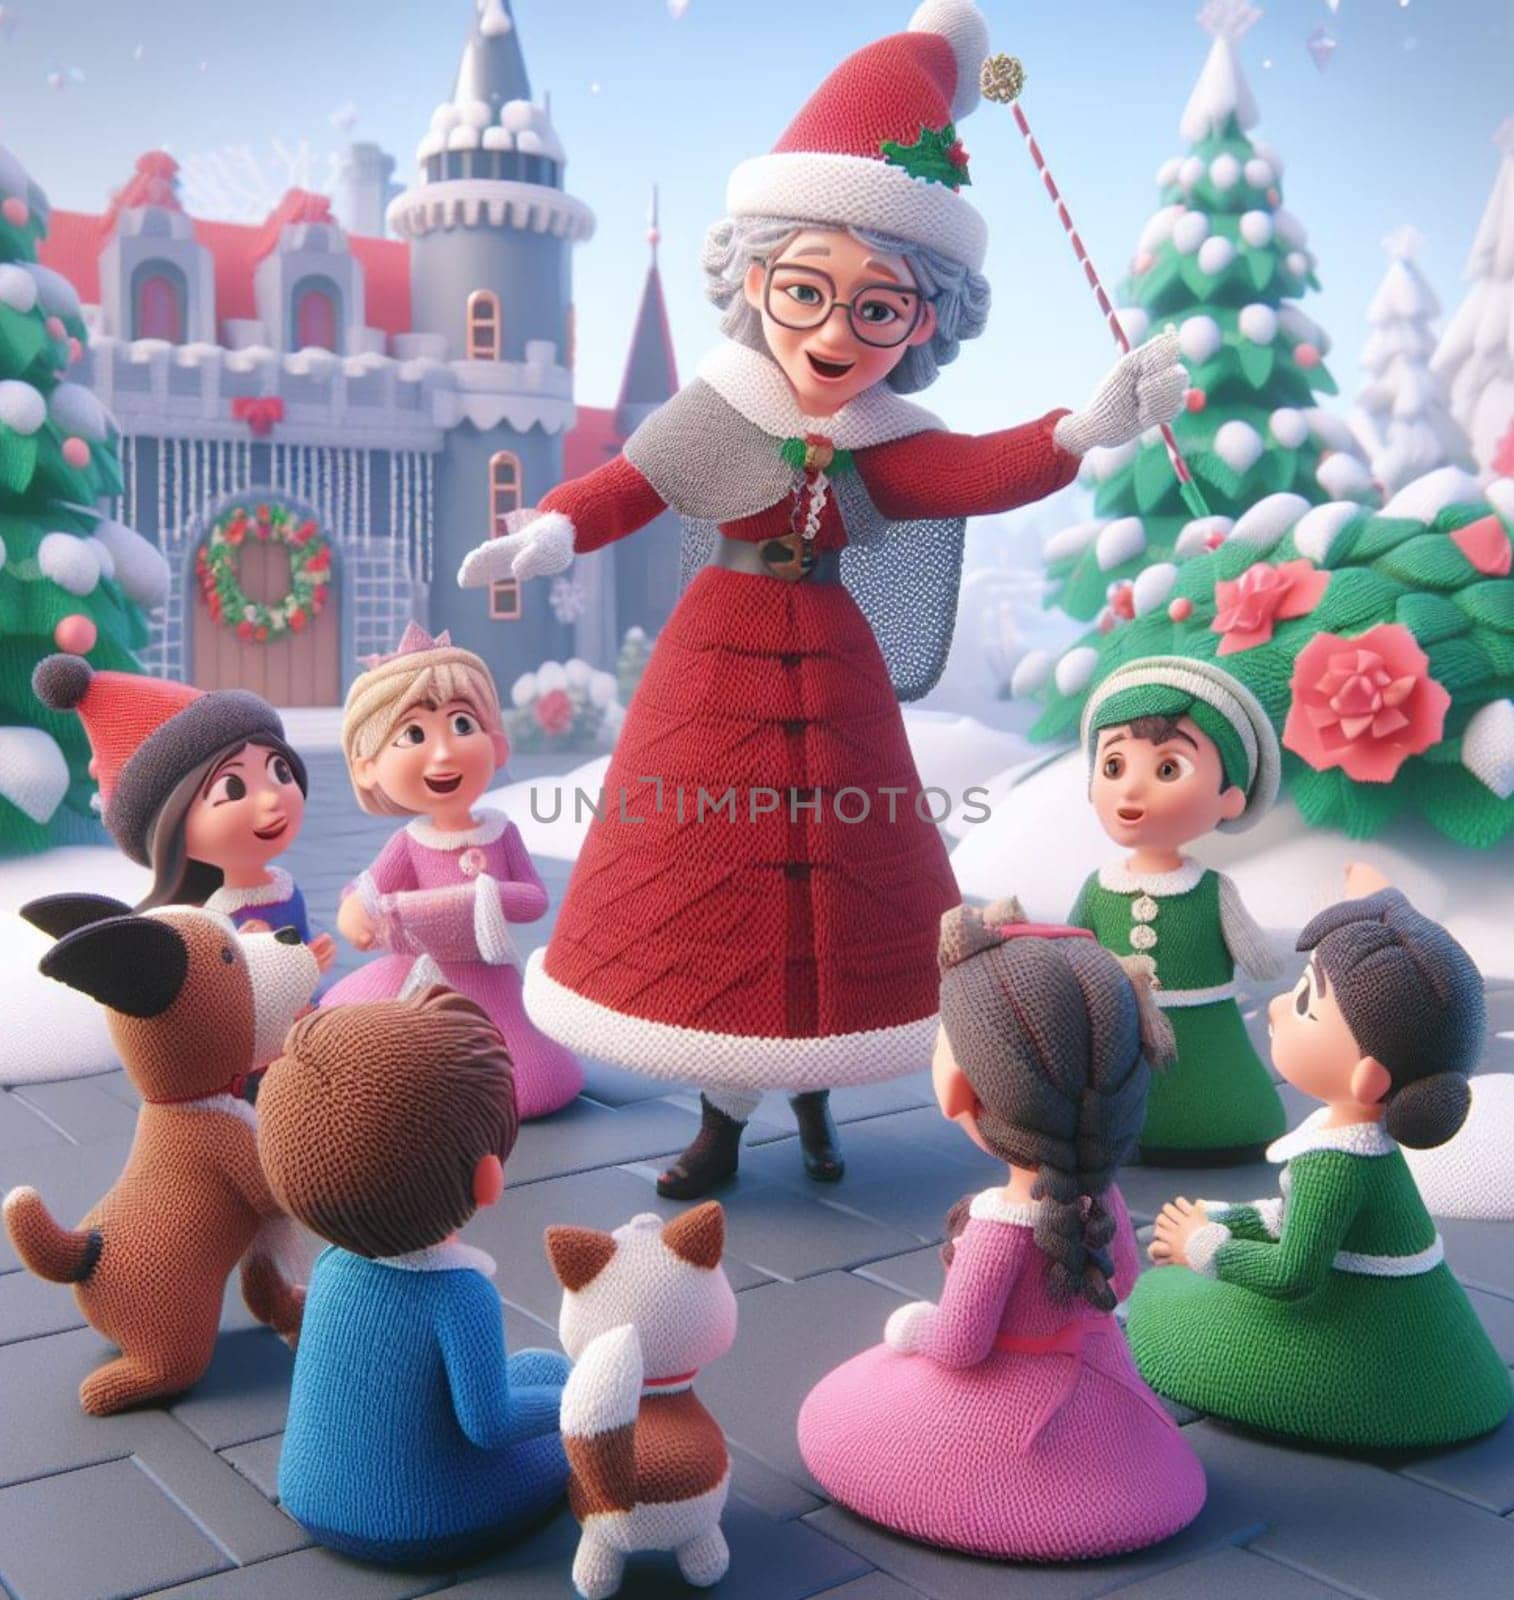 granny wear santa claus costume telling christmas fairy tales to children near a castle illustration 3d render ai art generated